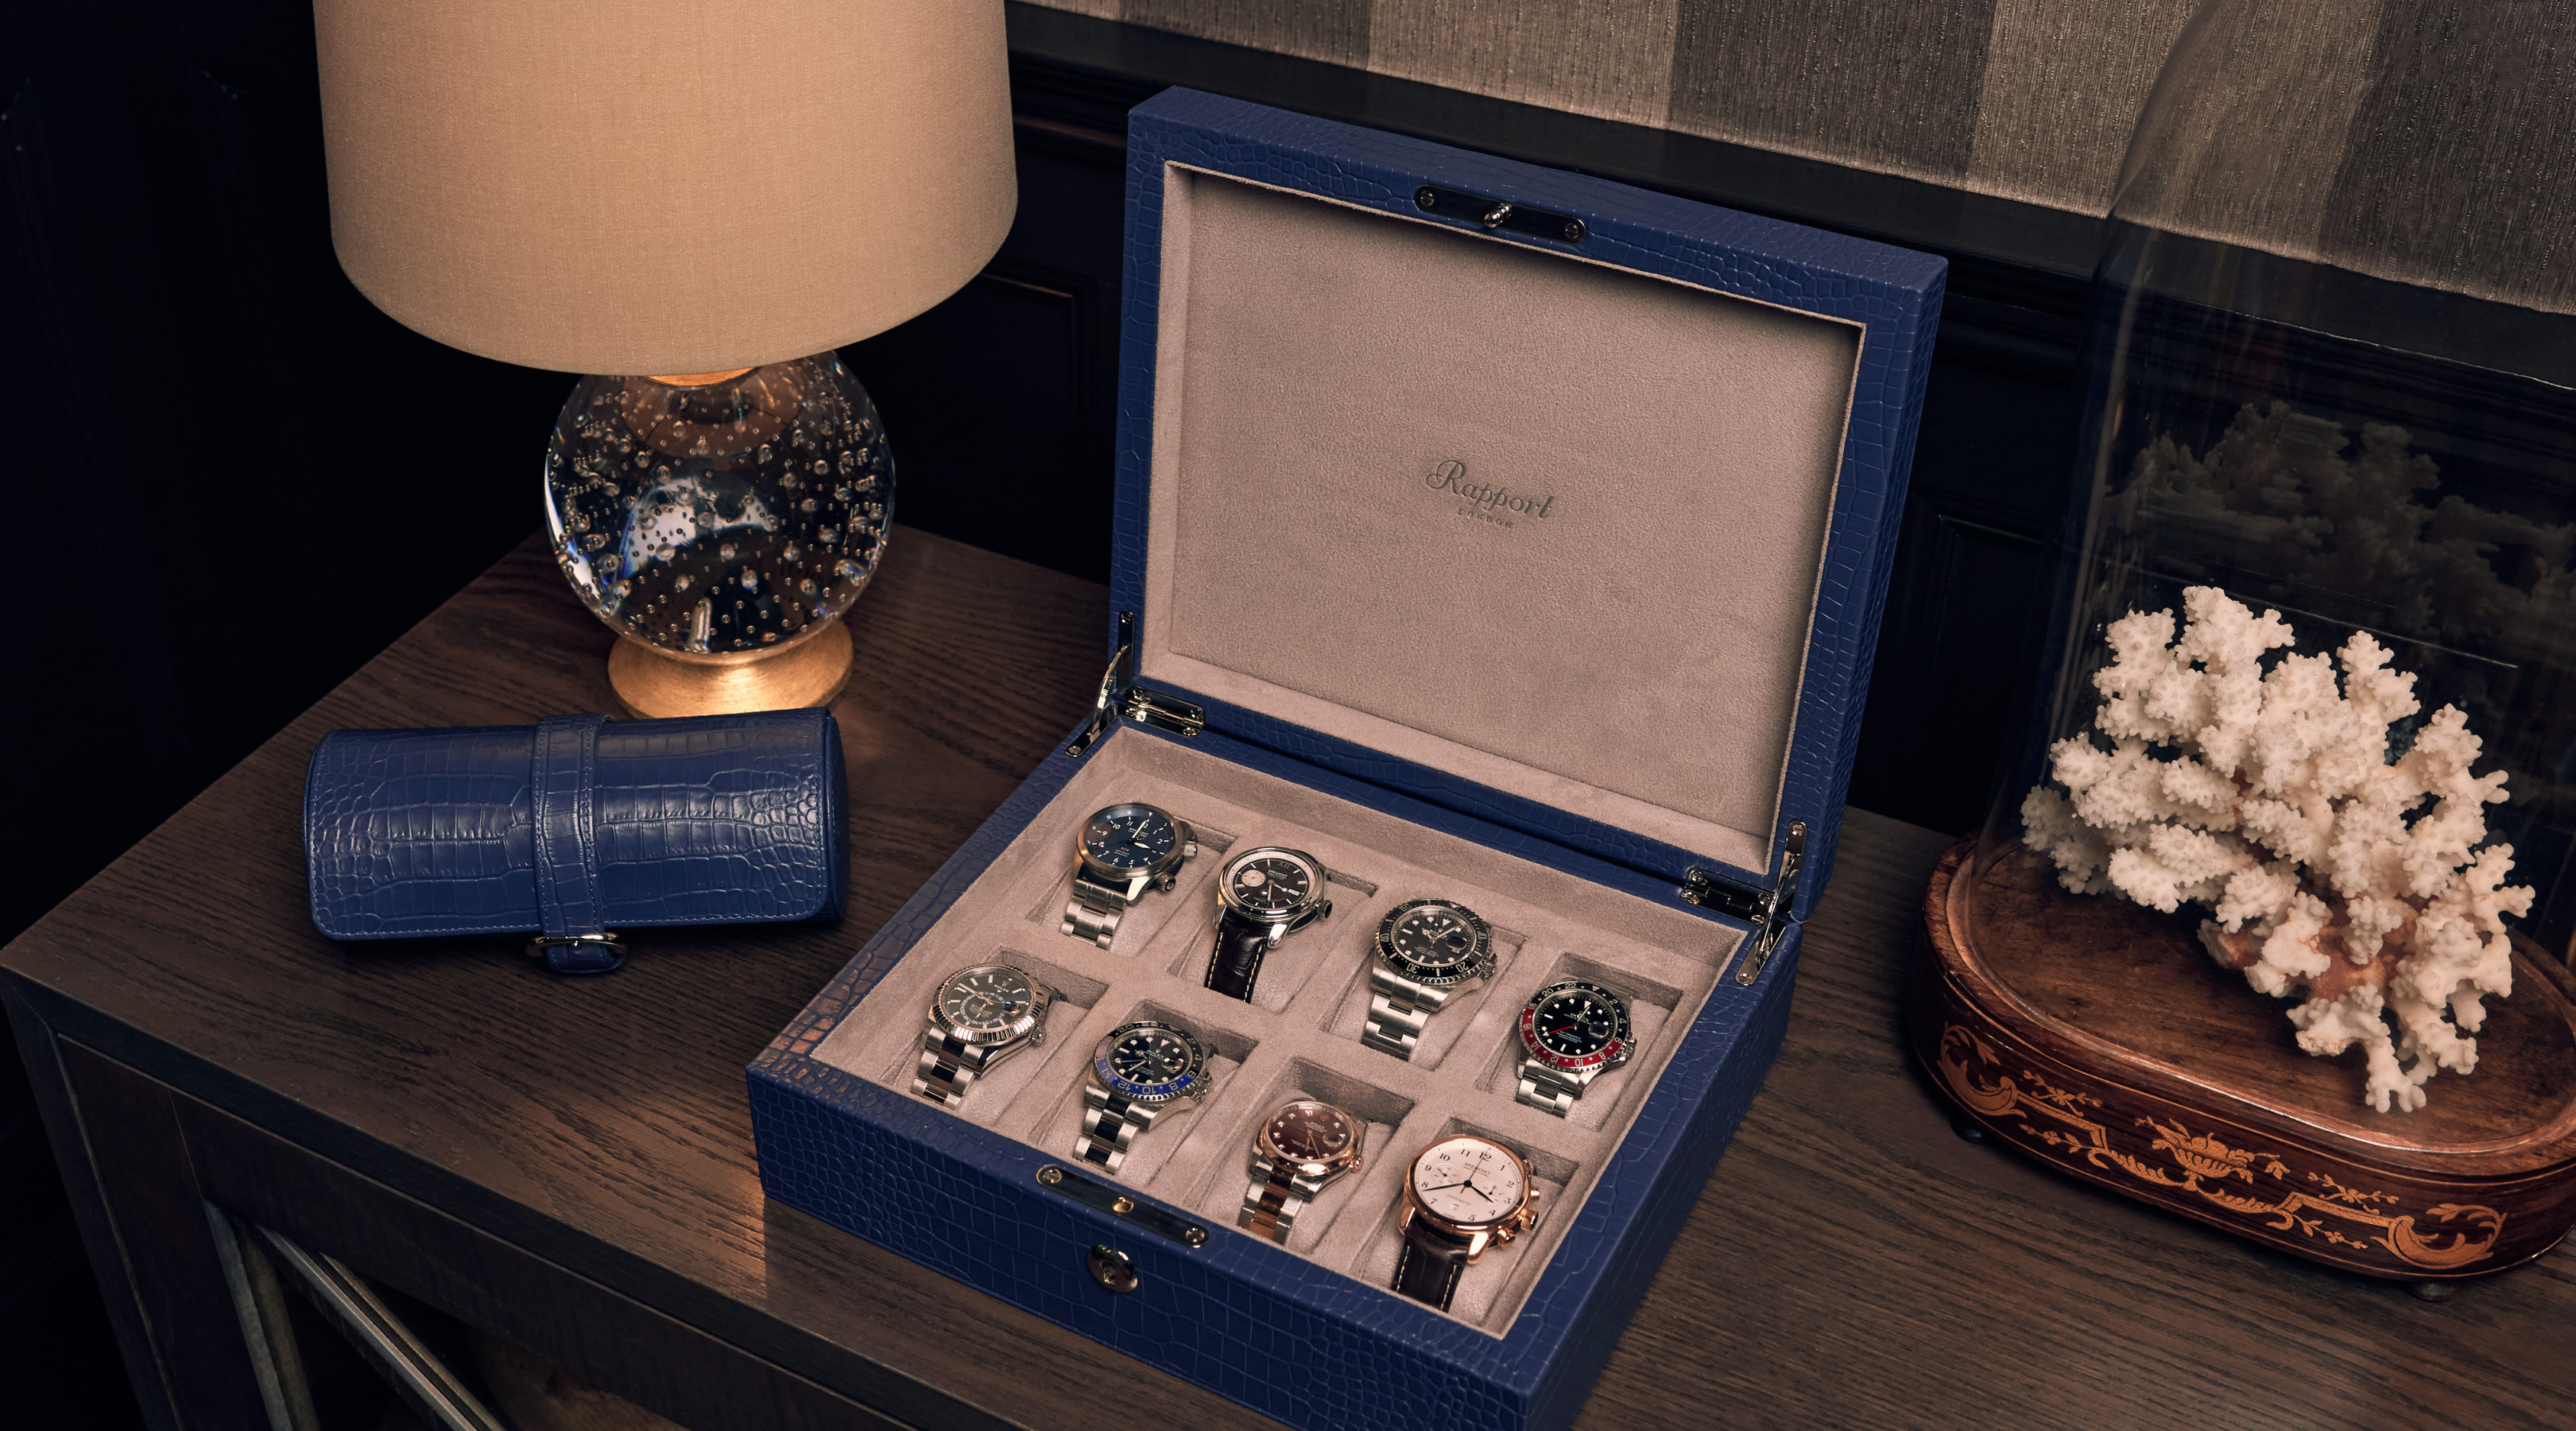 More than just Simple Timepieces - Looking after Your Family Heirlooms